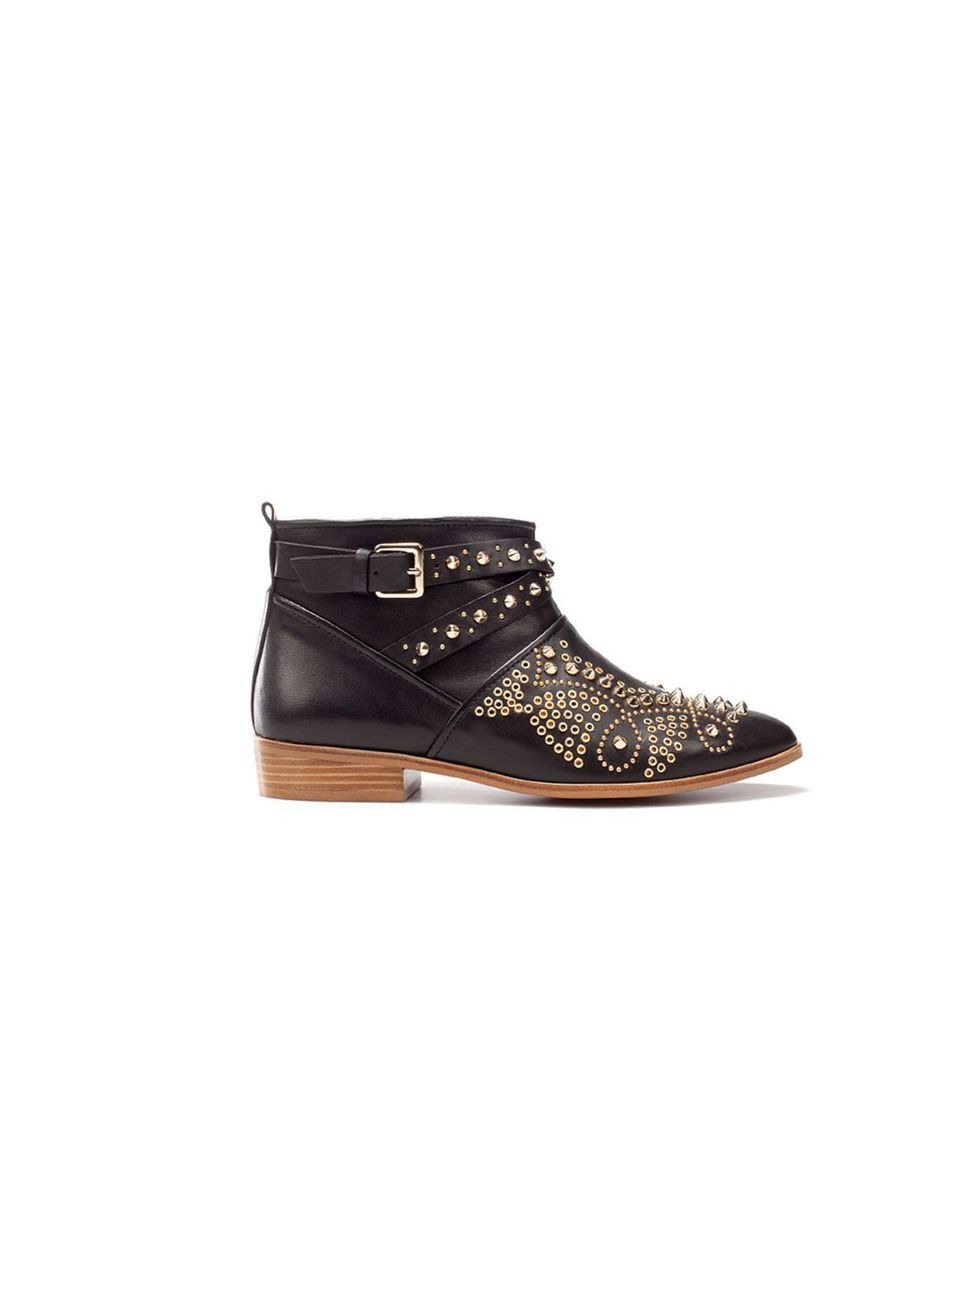 <p>Add cool-girl edge to neon jeans with these studded ankle boots <a href="http://www.zara.com/webapp/wcs/stores/servlet/product/uk/en/zara-S2012/189510/711515/ANKLE%2BBOOT%2BWITH%2BSTUDDED%2BTOE">Zara</a> studded ankle boots, £119</p>